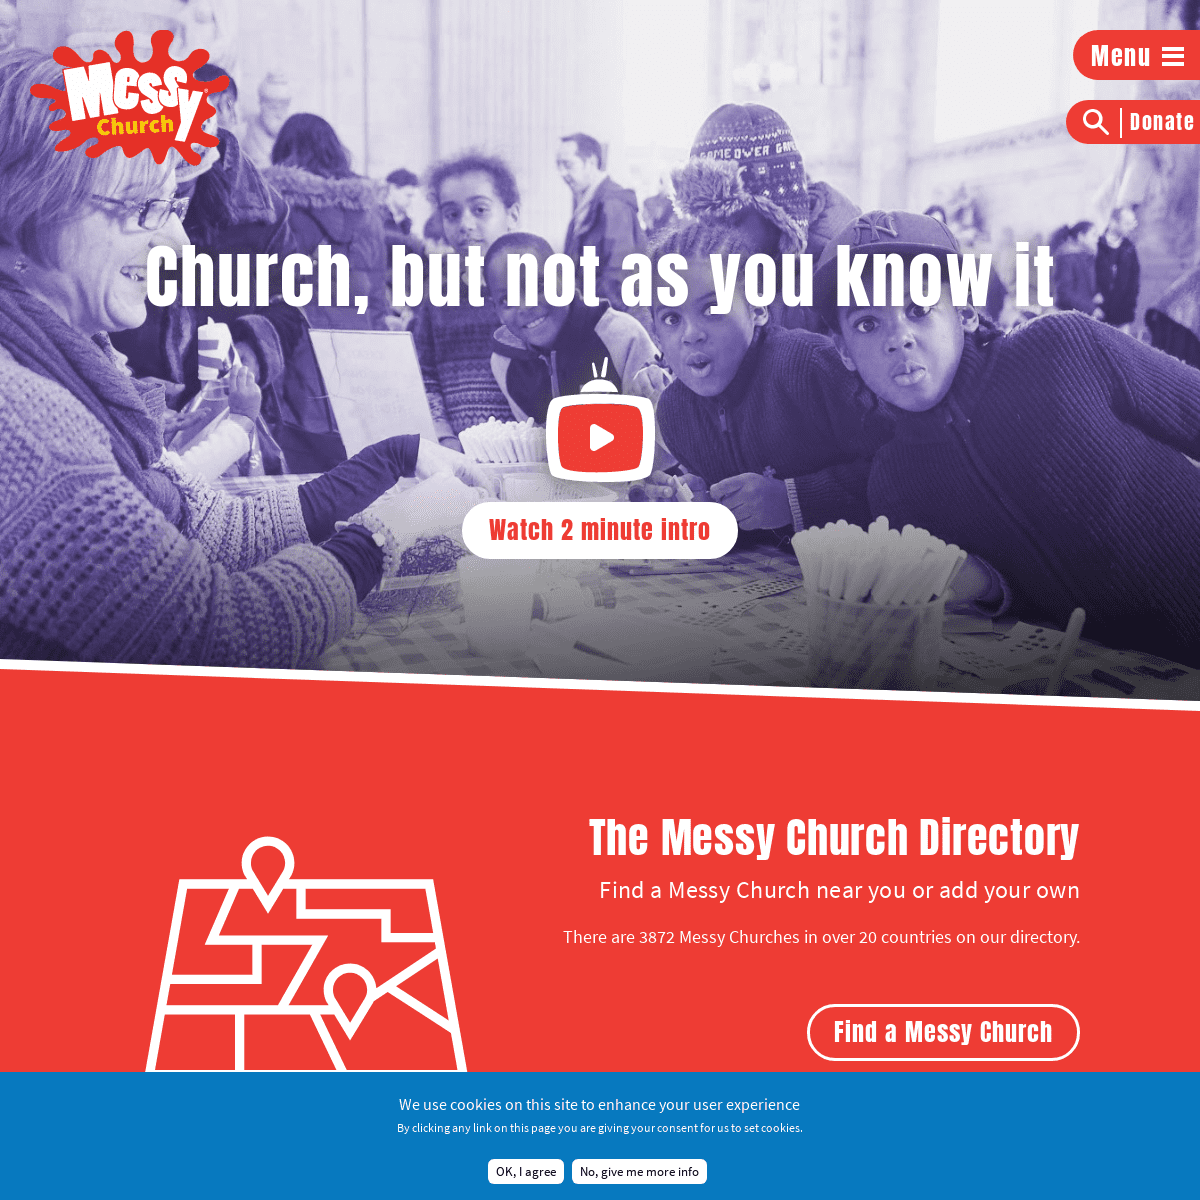 Messy Church | Church, but not as you know it